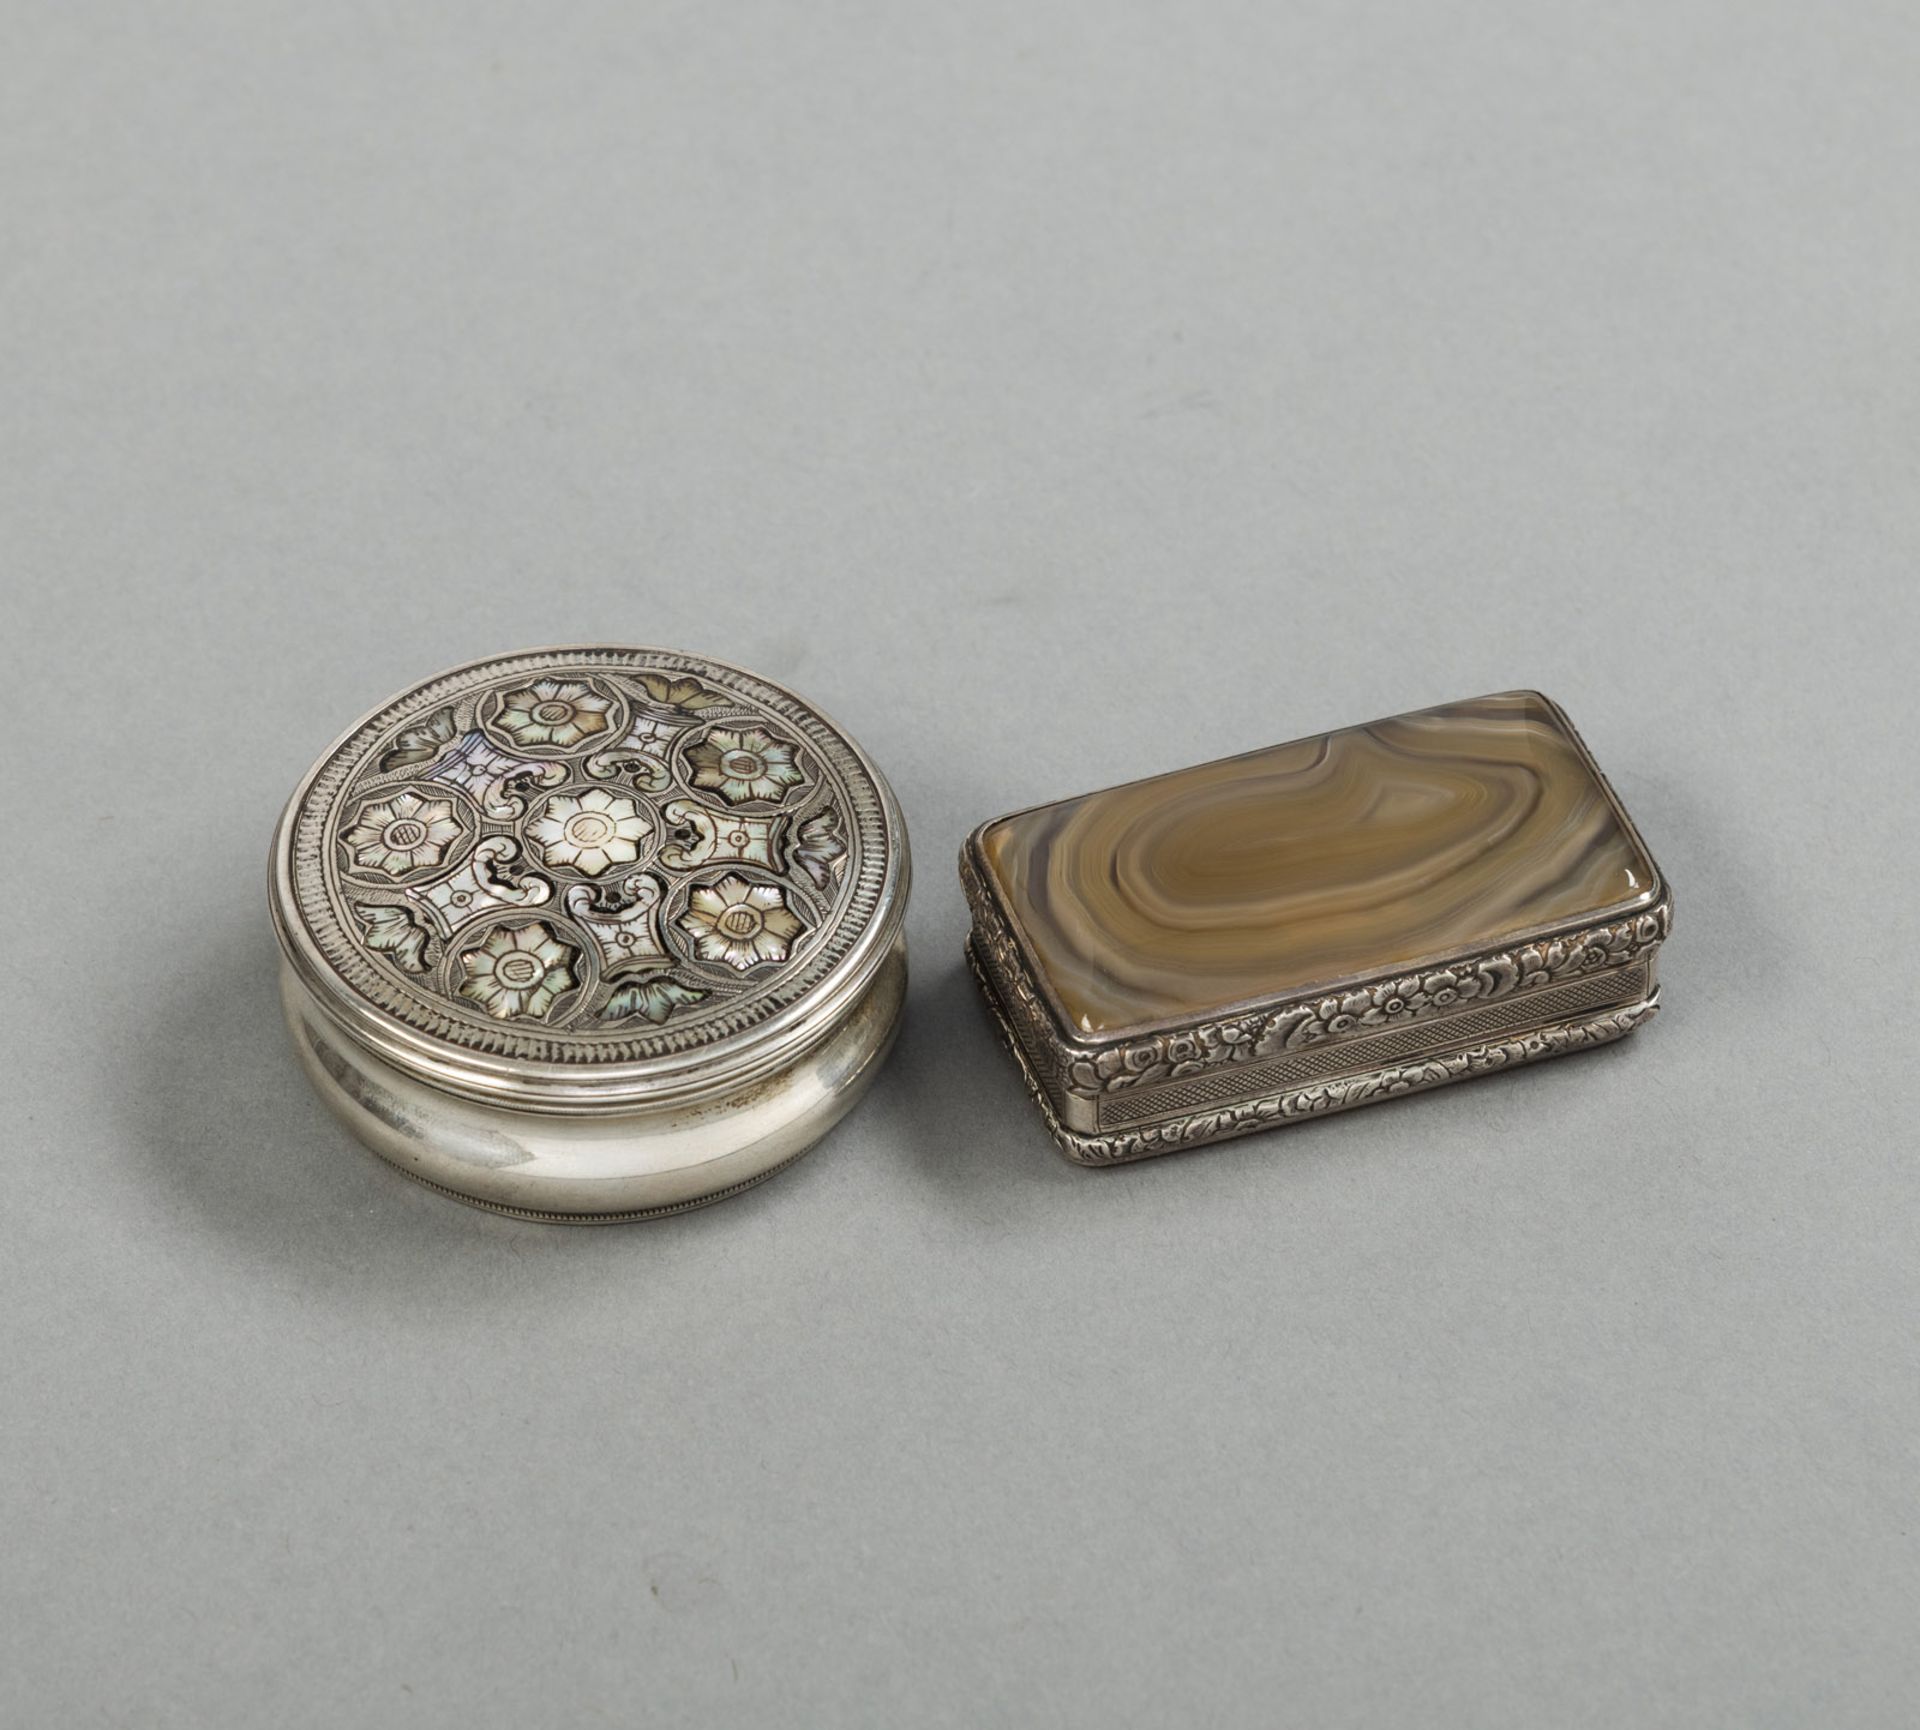 TWO SILVER MOUNTED TABATIERES